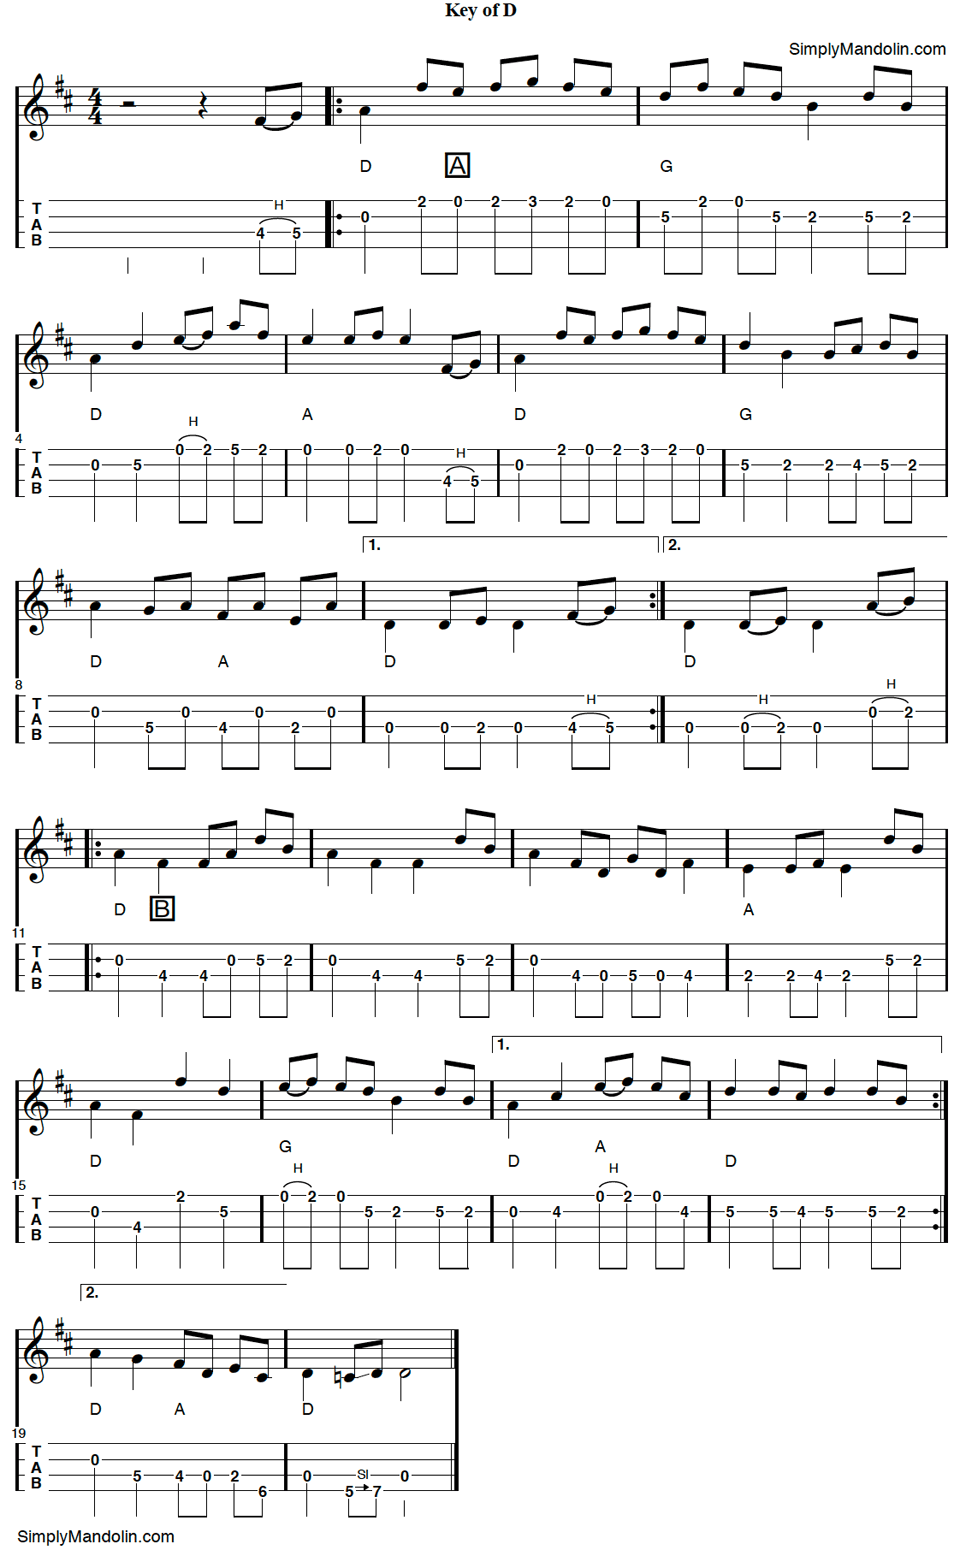 Image of the mandolin tab & music for the tune "New Five Cent Piece".